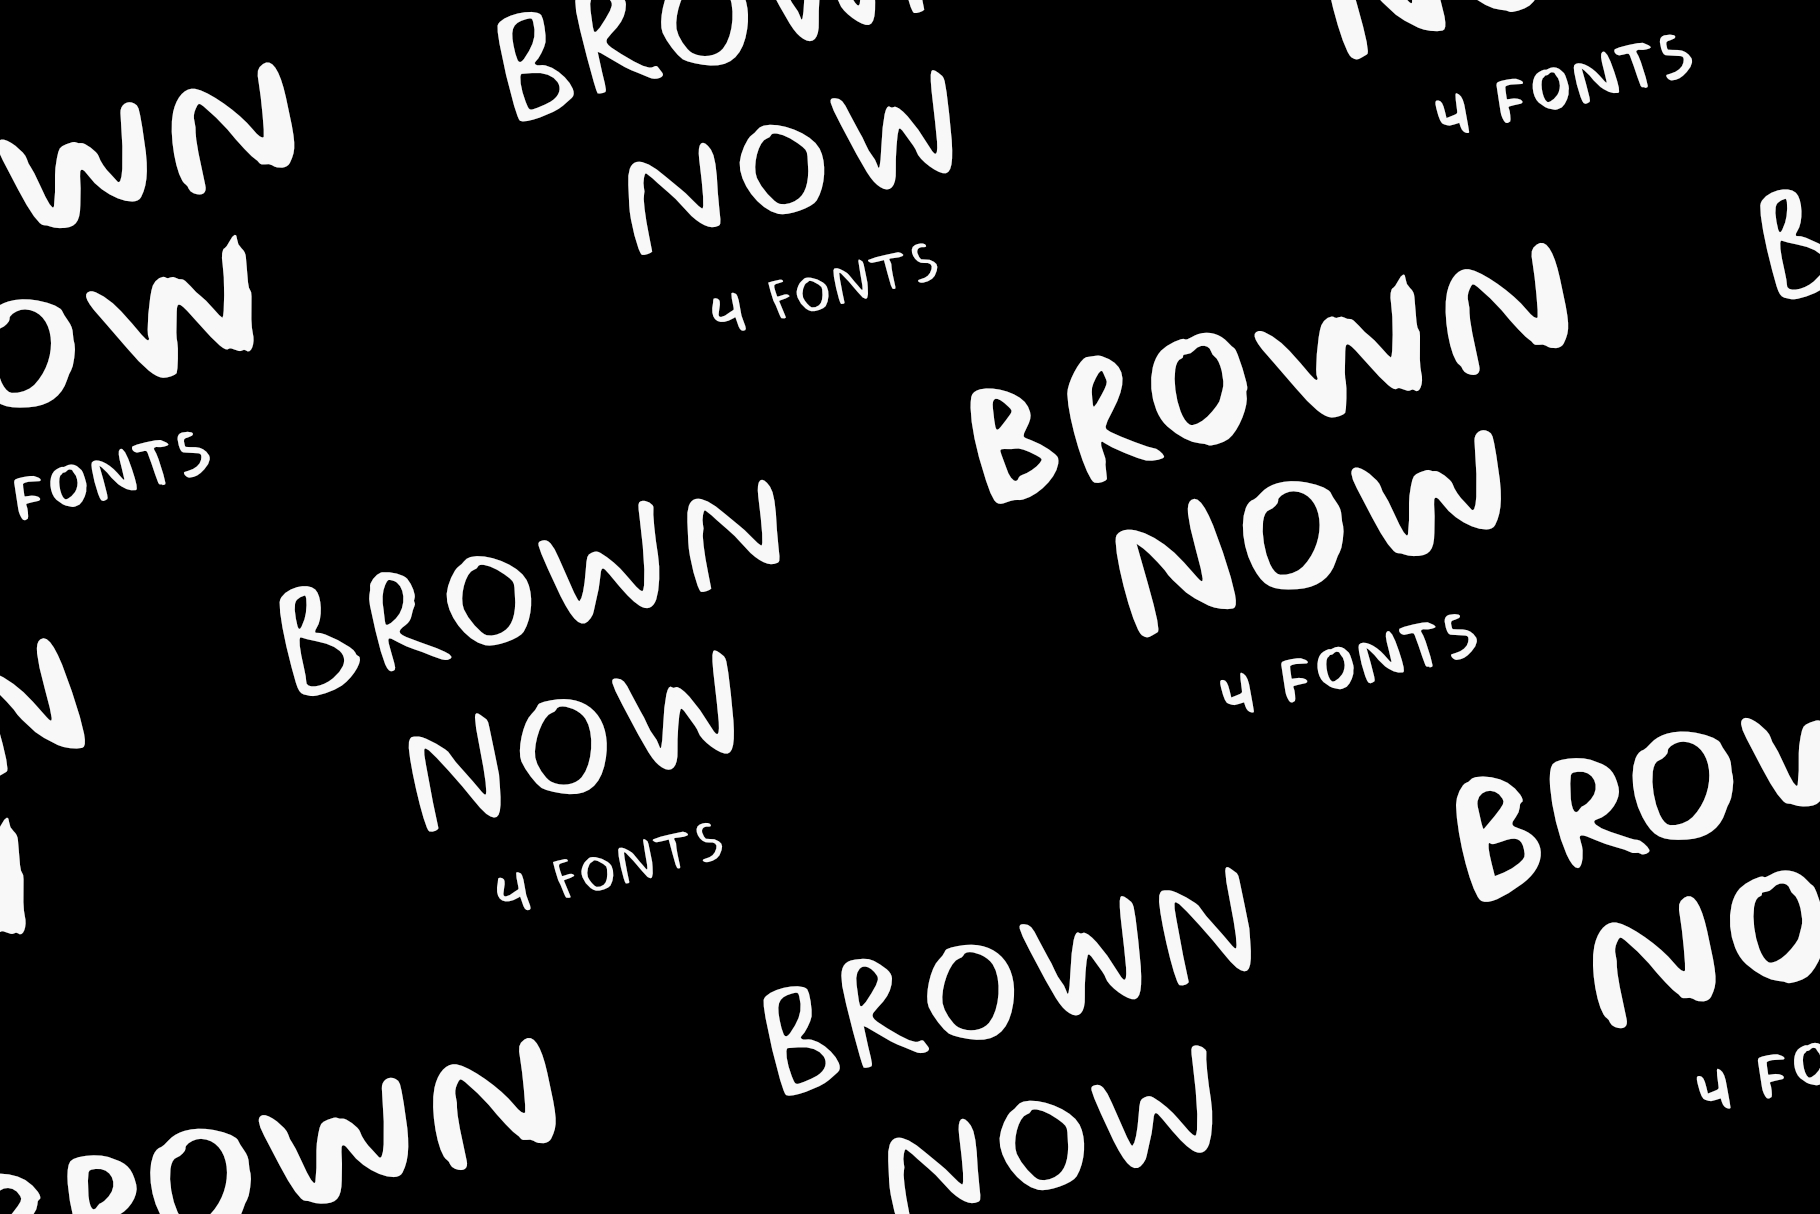 BROWN NOW ONE ITALIC